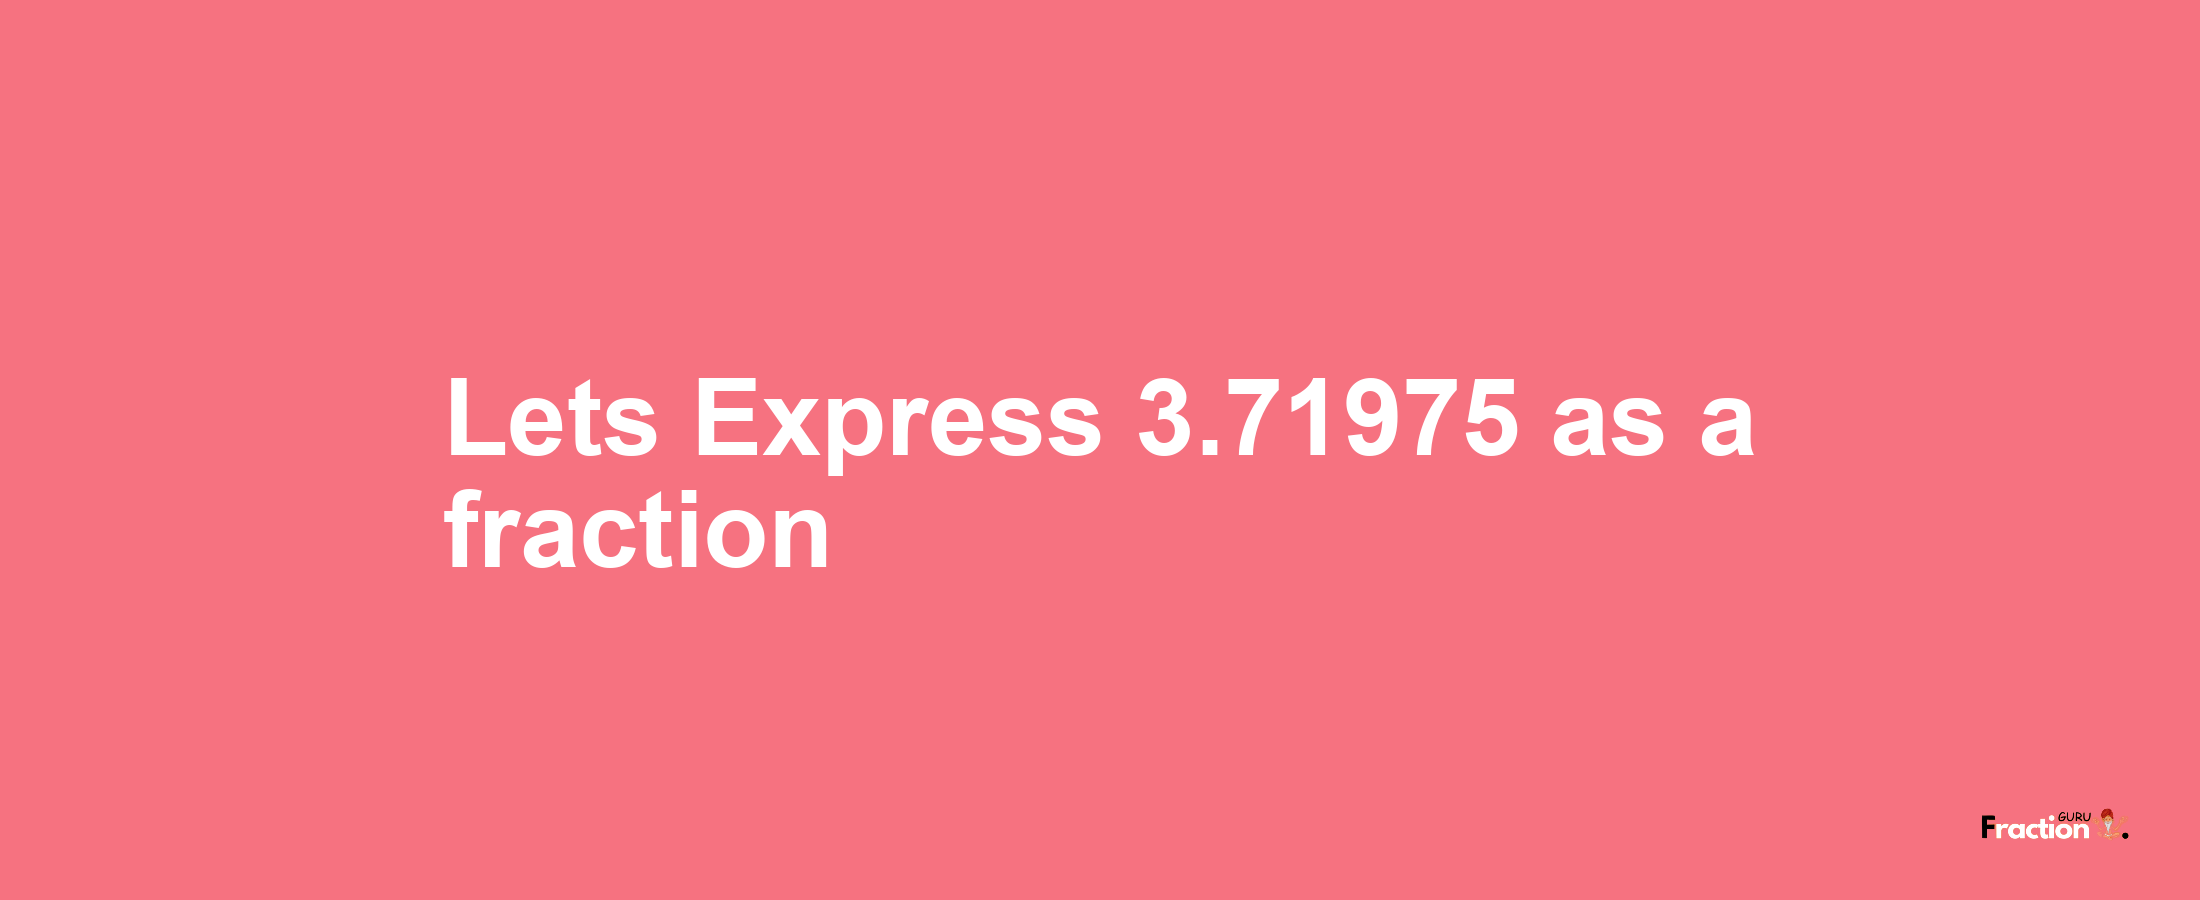 Lets Express 3.71975 as afraction